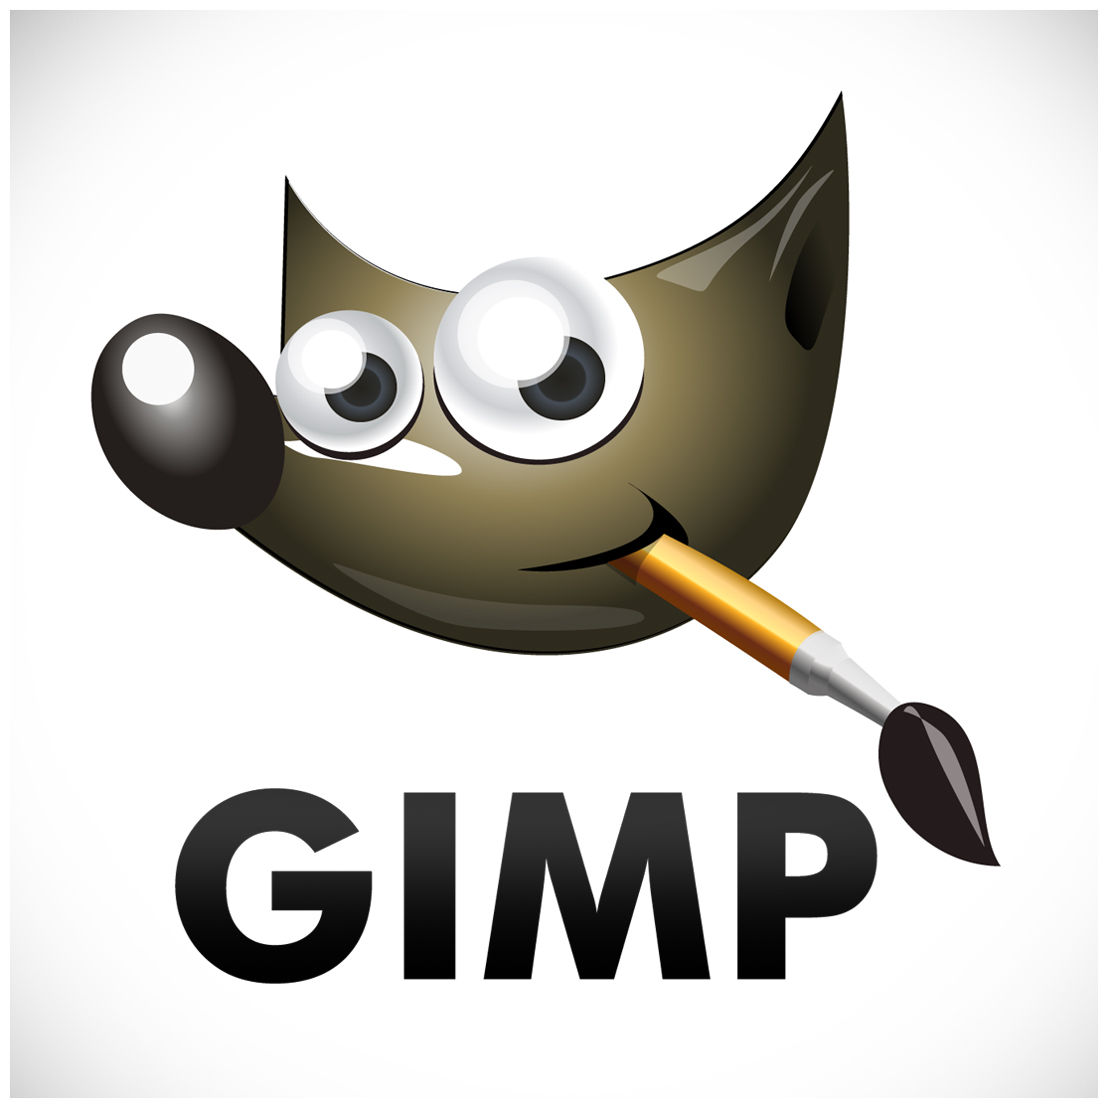 Make picture transparent with the Gimp on Linux | ☩ Walking in Light